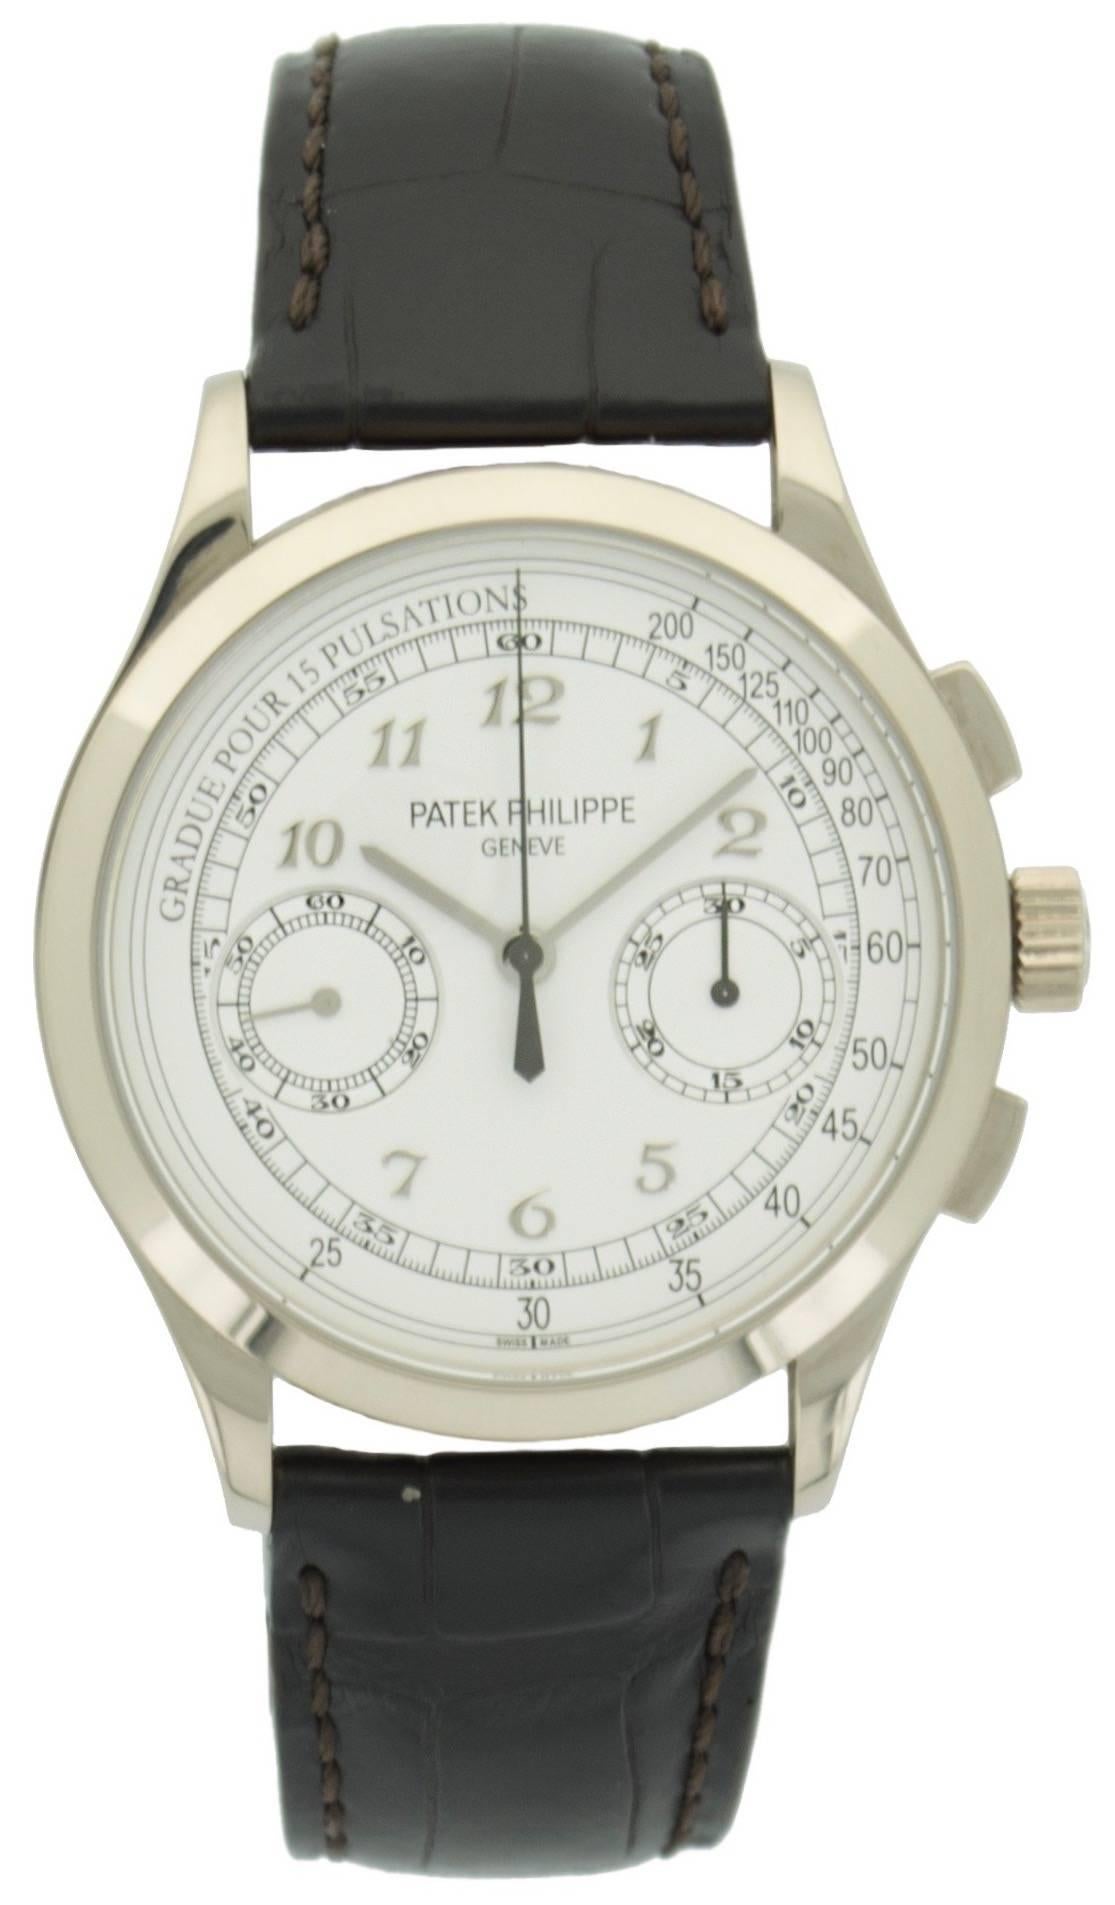 This well balanced, classically designed chronograph is one of Patek Philippe best modern pieces. The watch wears very well with a nice big case while not being too thick or overbearing. This example is in like-new condition with a beautiful white